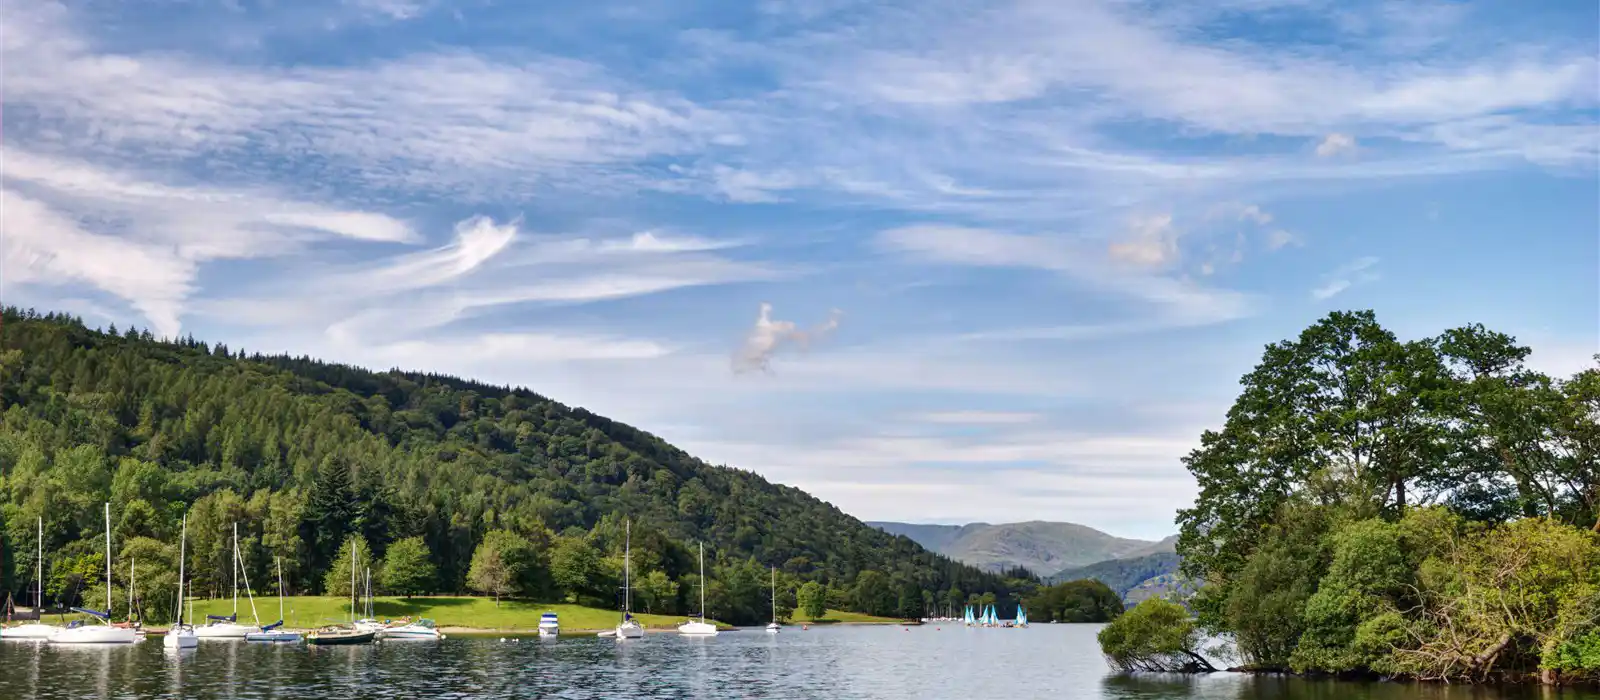 Windermere in the Lake District National Park